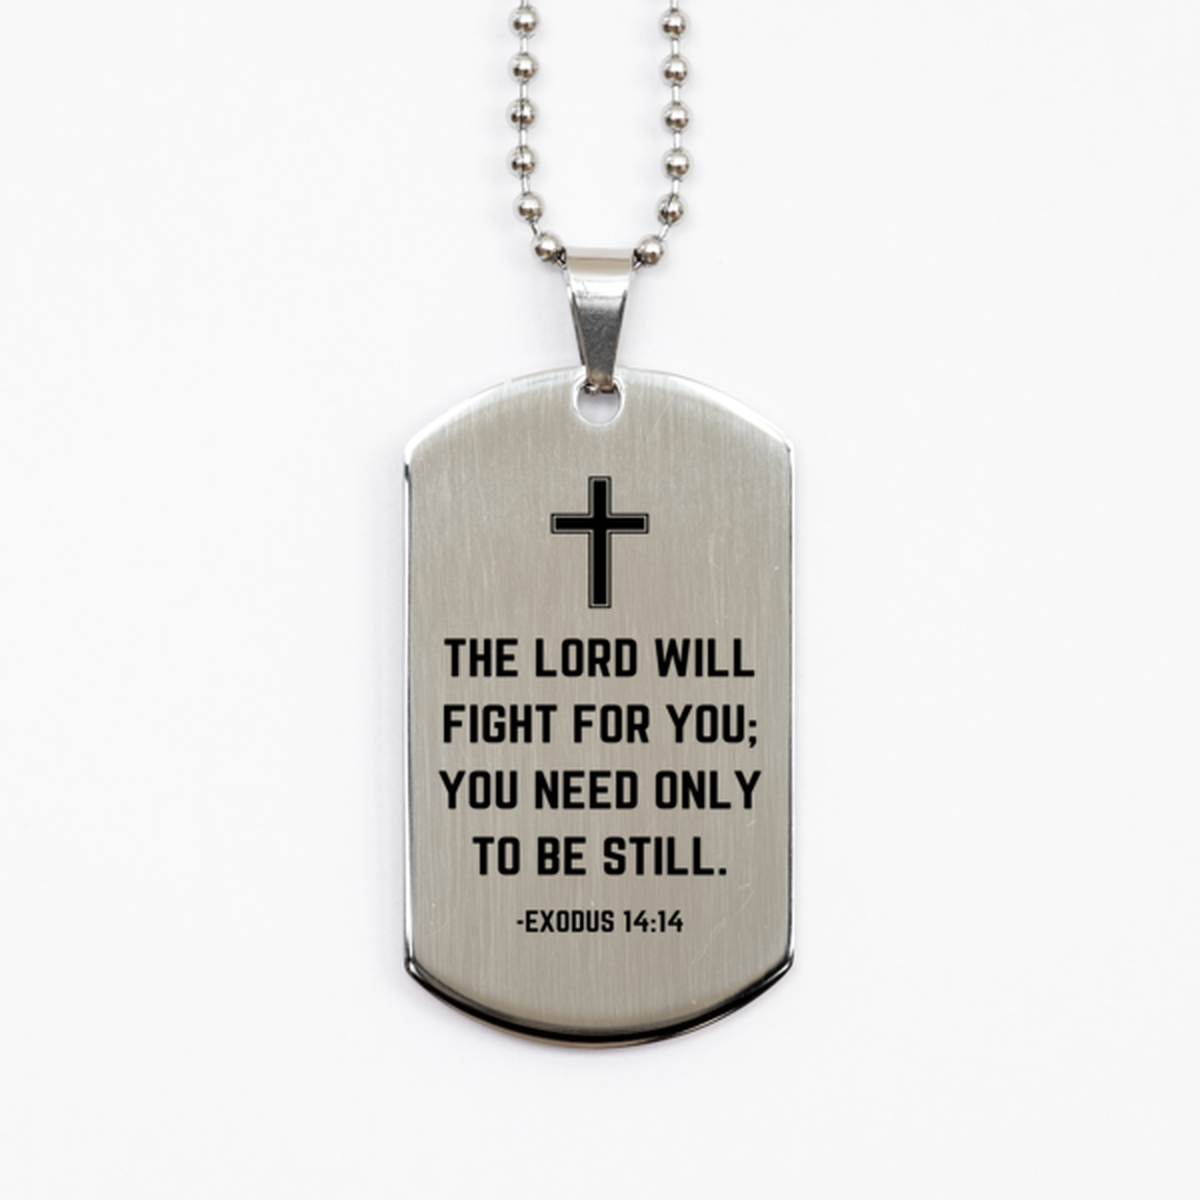 Baptism Gifts For Teenage Boys Girls, Christian Bible Verse Silver Dog Tag, The Lord will fight for you, Confirmation Gifts, Bible Verse Necklace for Son, Godson, Grandson, Nephew